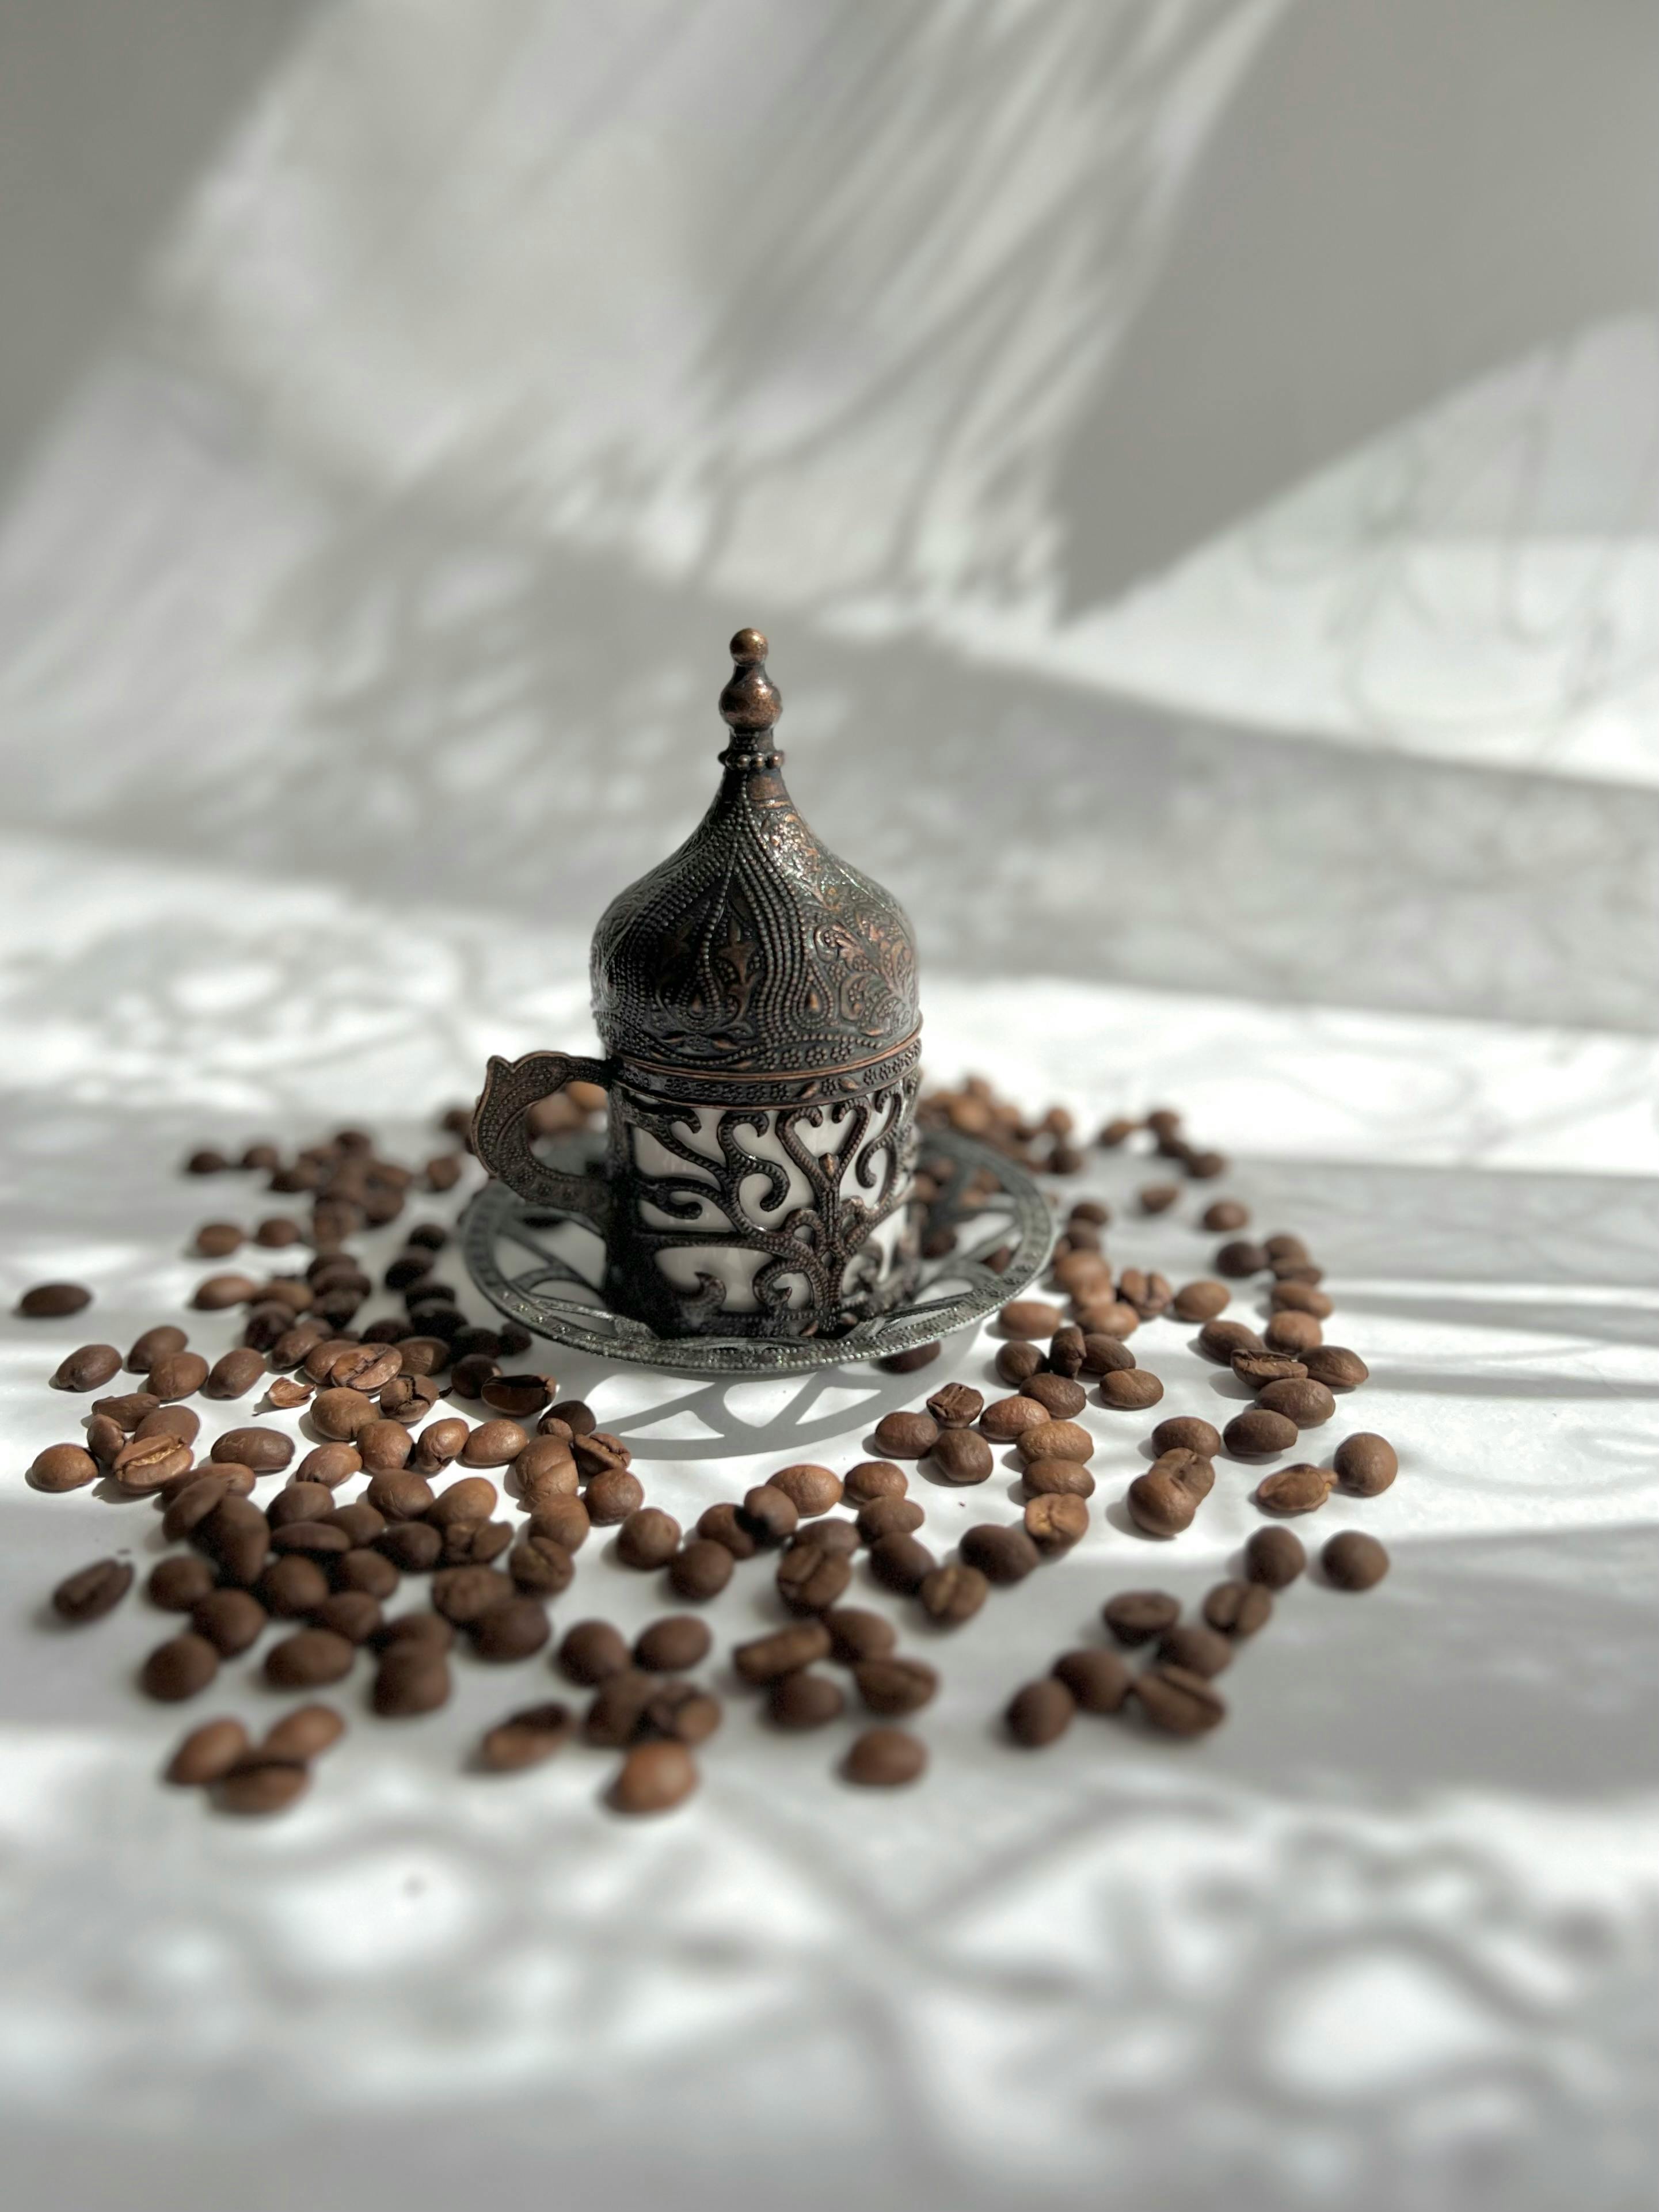 porcelain and metal traditional turkish cup among coffee beans